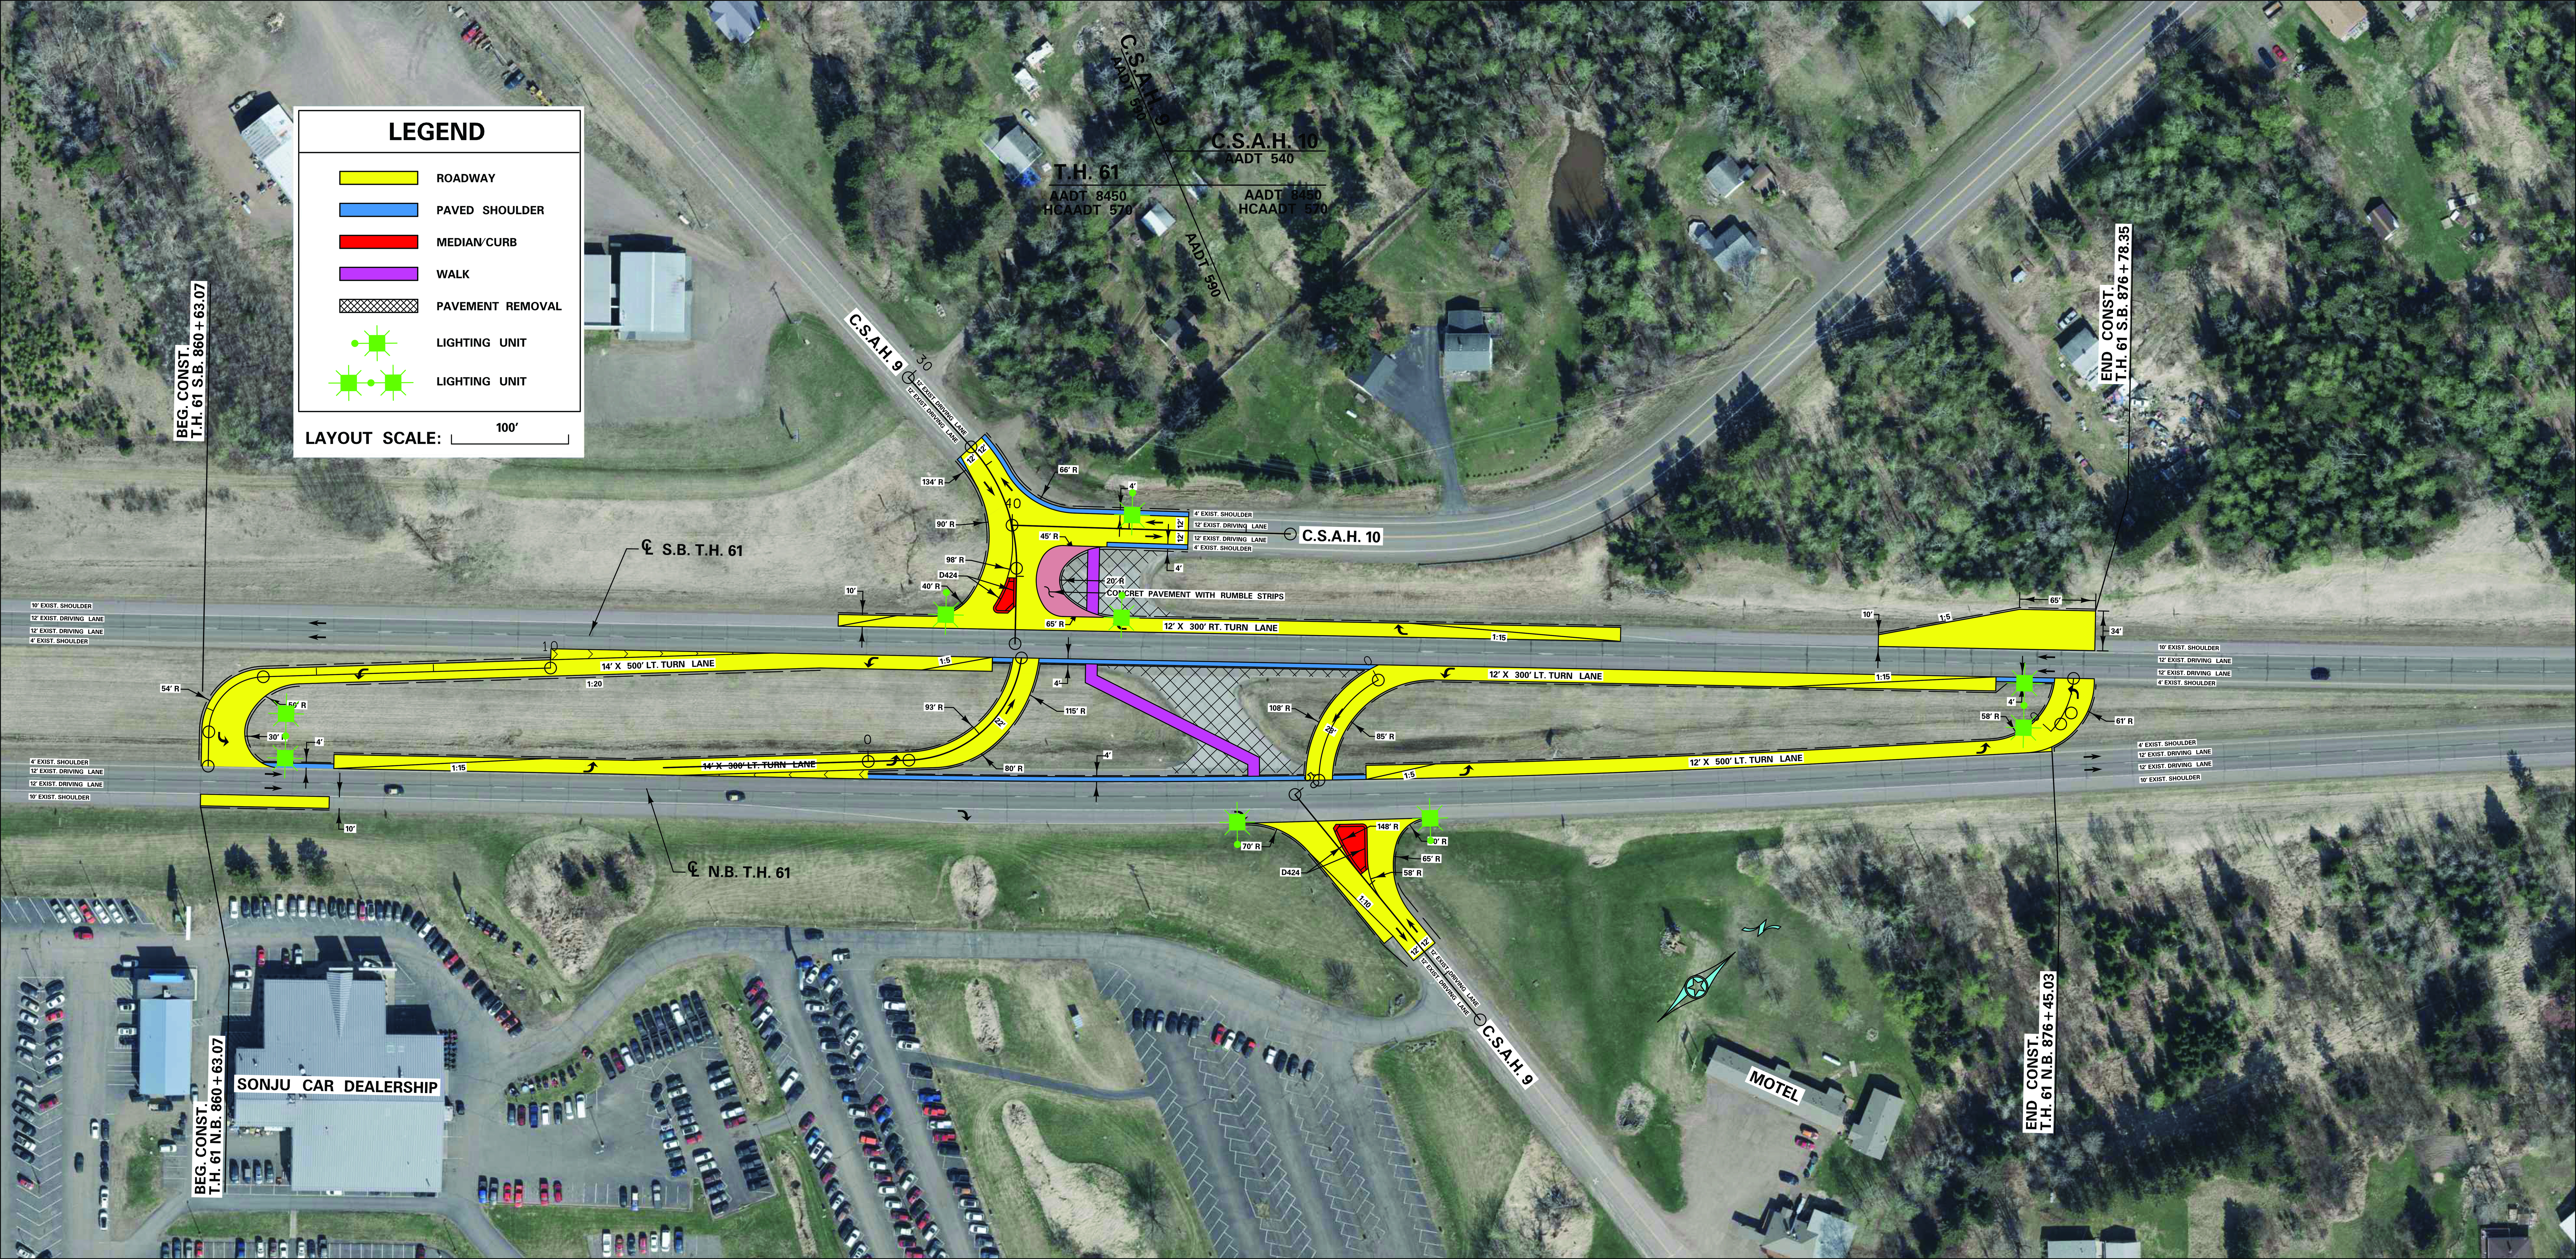 A rendering of the Hwy 61 Two Harbors proposed reduced conflict intersection.